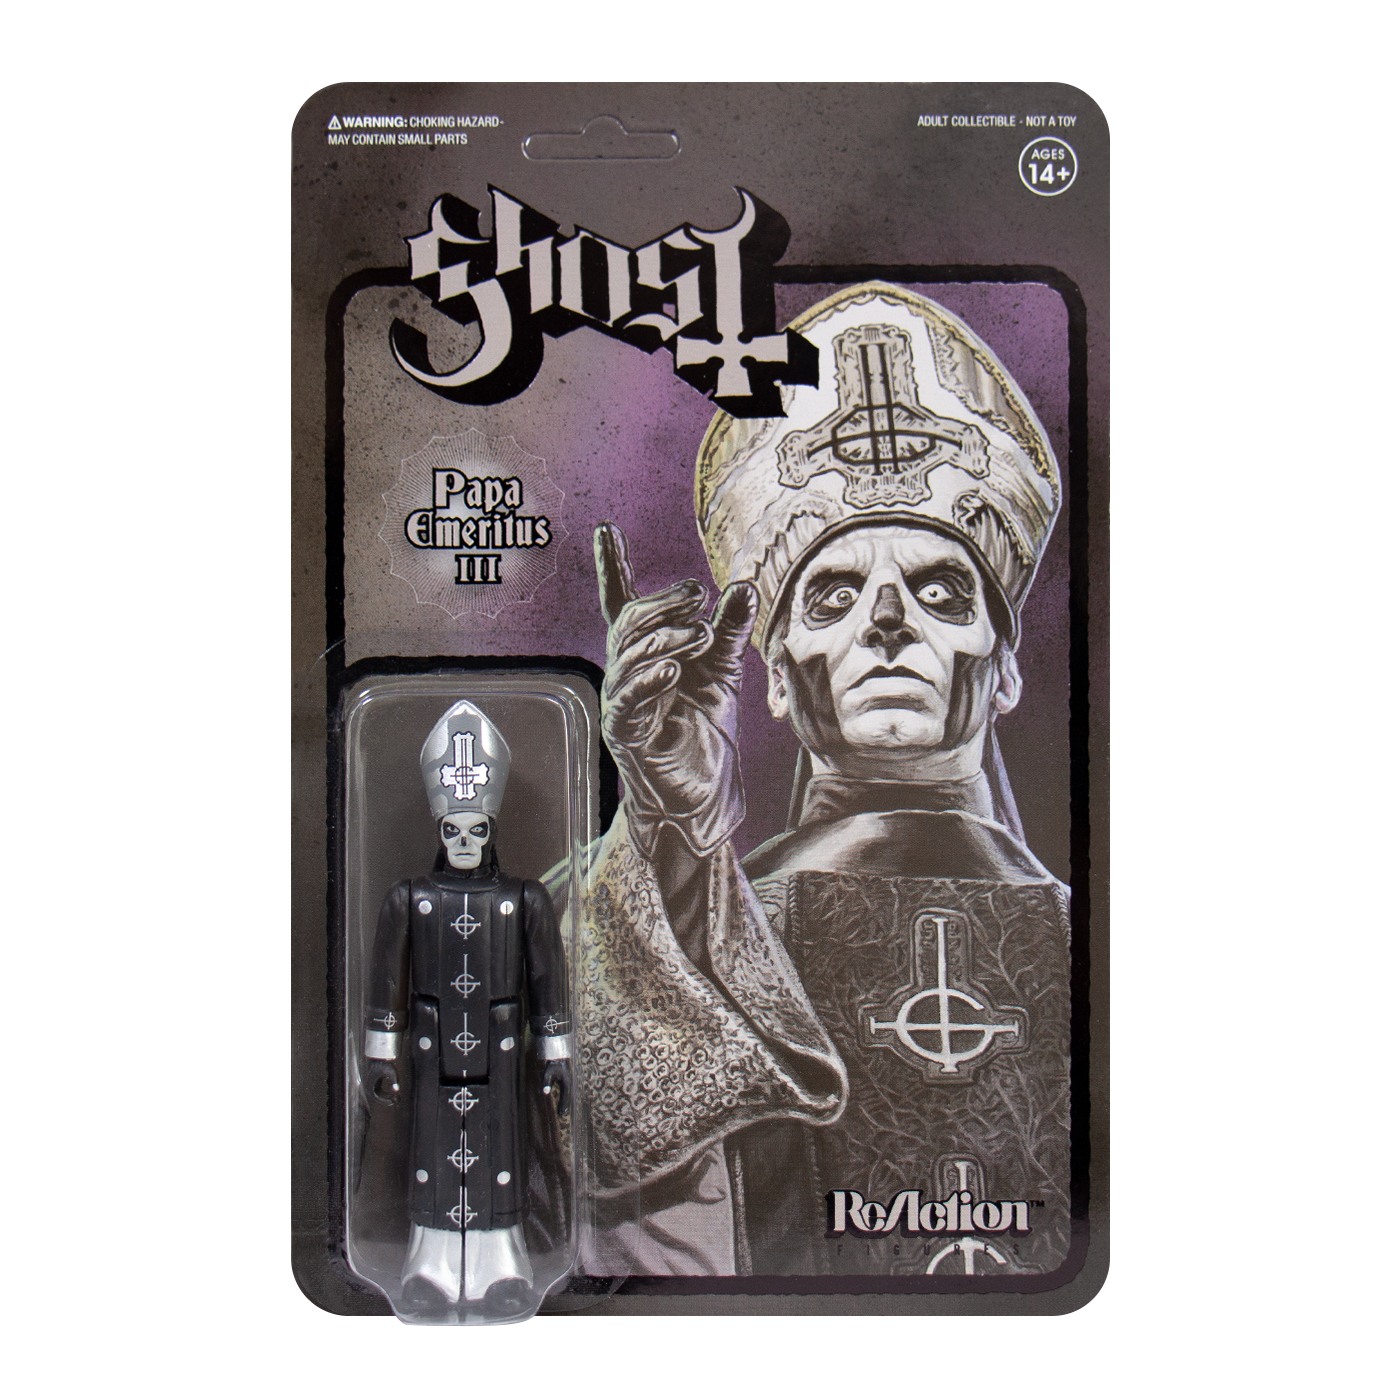 Papa Emeritus III (Black Series) ReAction Figure - Ghosts by Super7 *PUNCHED